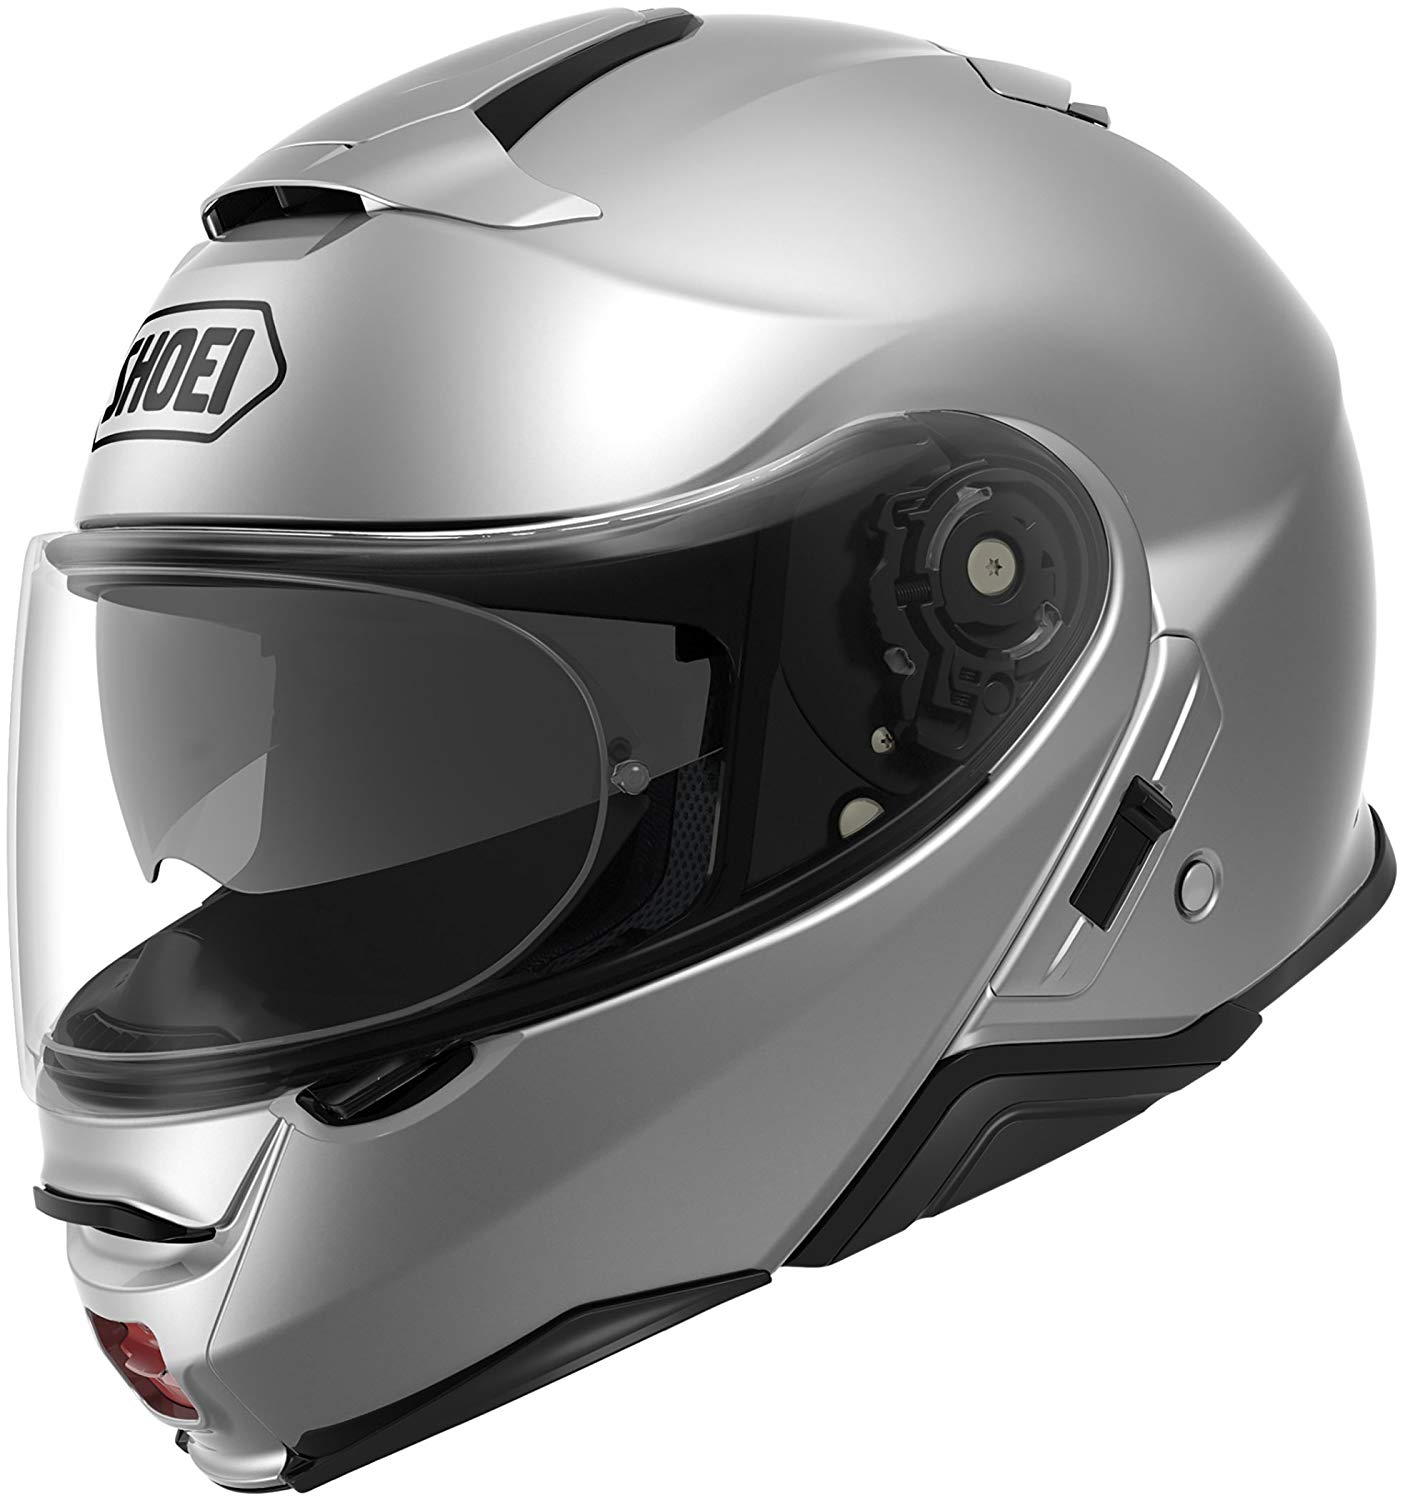 Top 8 Modular Motorcycle Helmets - Which one is the BEST?